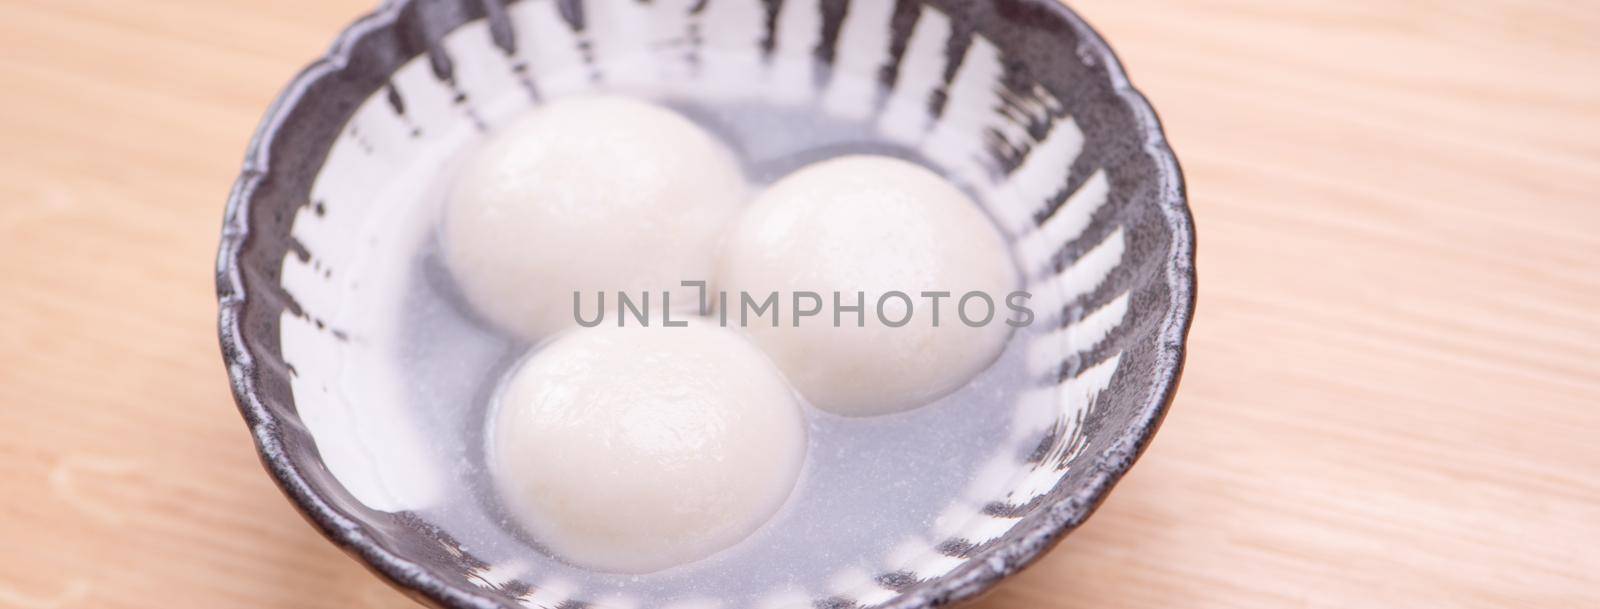 Tang yuan, tangyuan, yuanxiao in a small bowl. Delicious asian traditional festive food rice dumpling balls with stuffed fillings for Chinese Lantern Festival, close up.